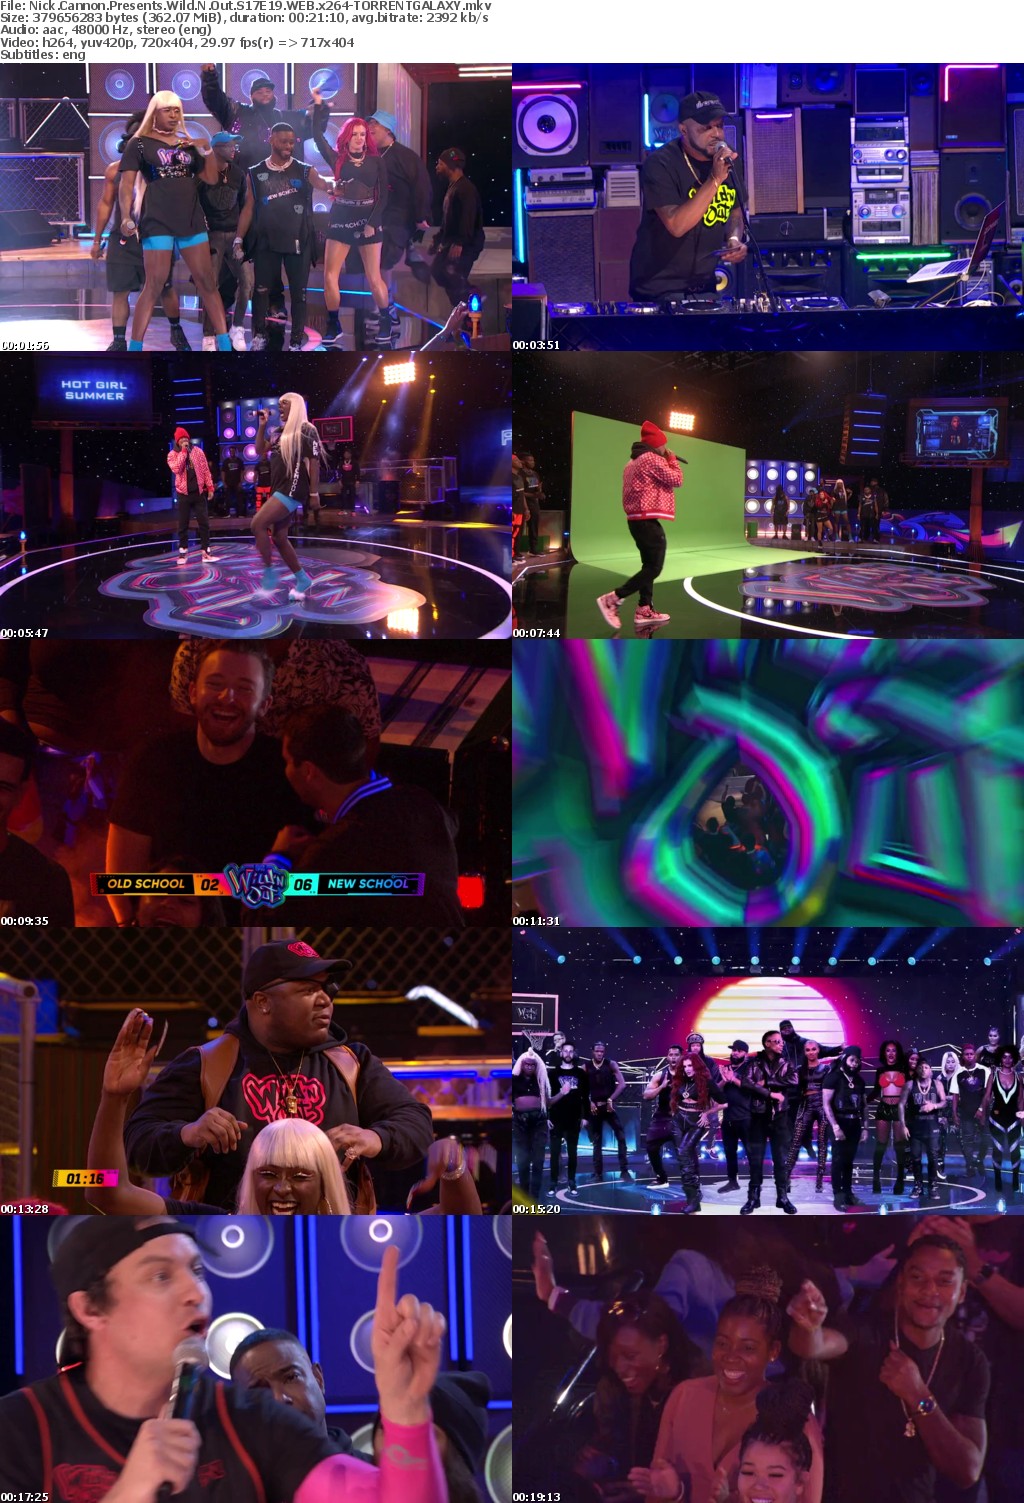 Nick Cannon Presents Wild N Out S17E19 WEB x264-GALAXY